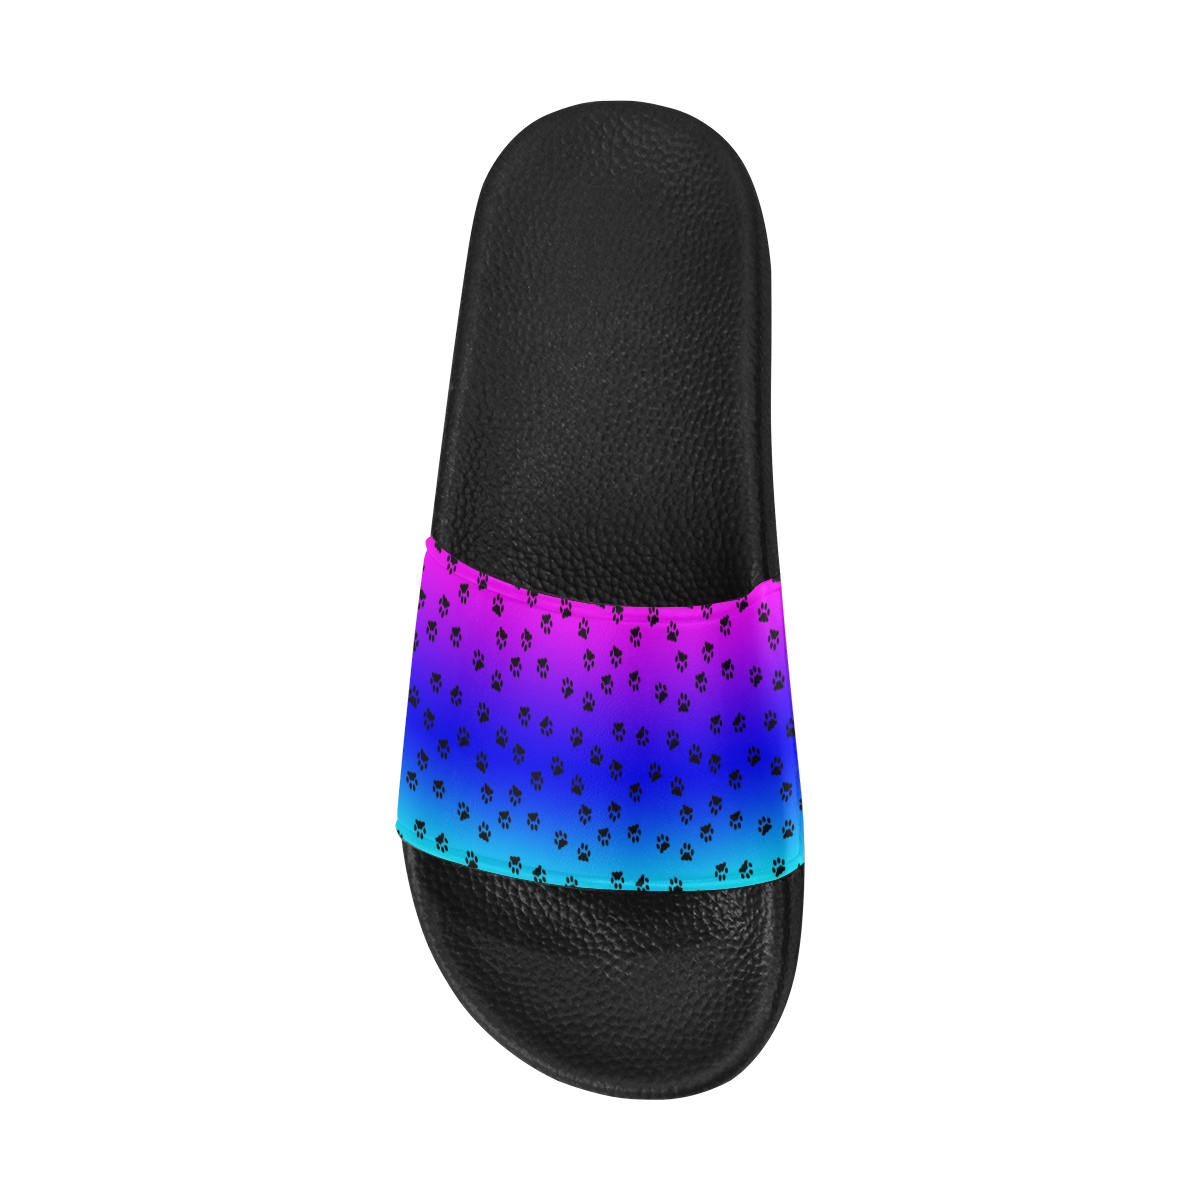 rainbow with black paws Women's Slide Sandals (Model 057)